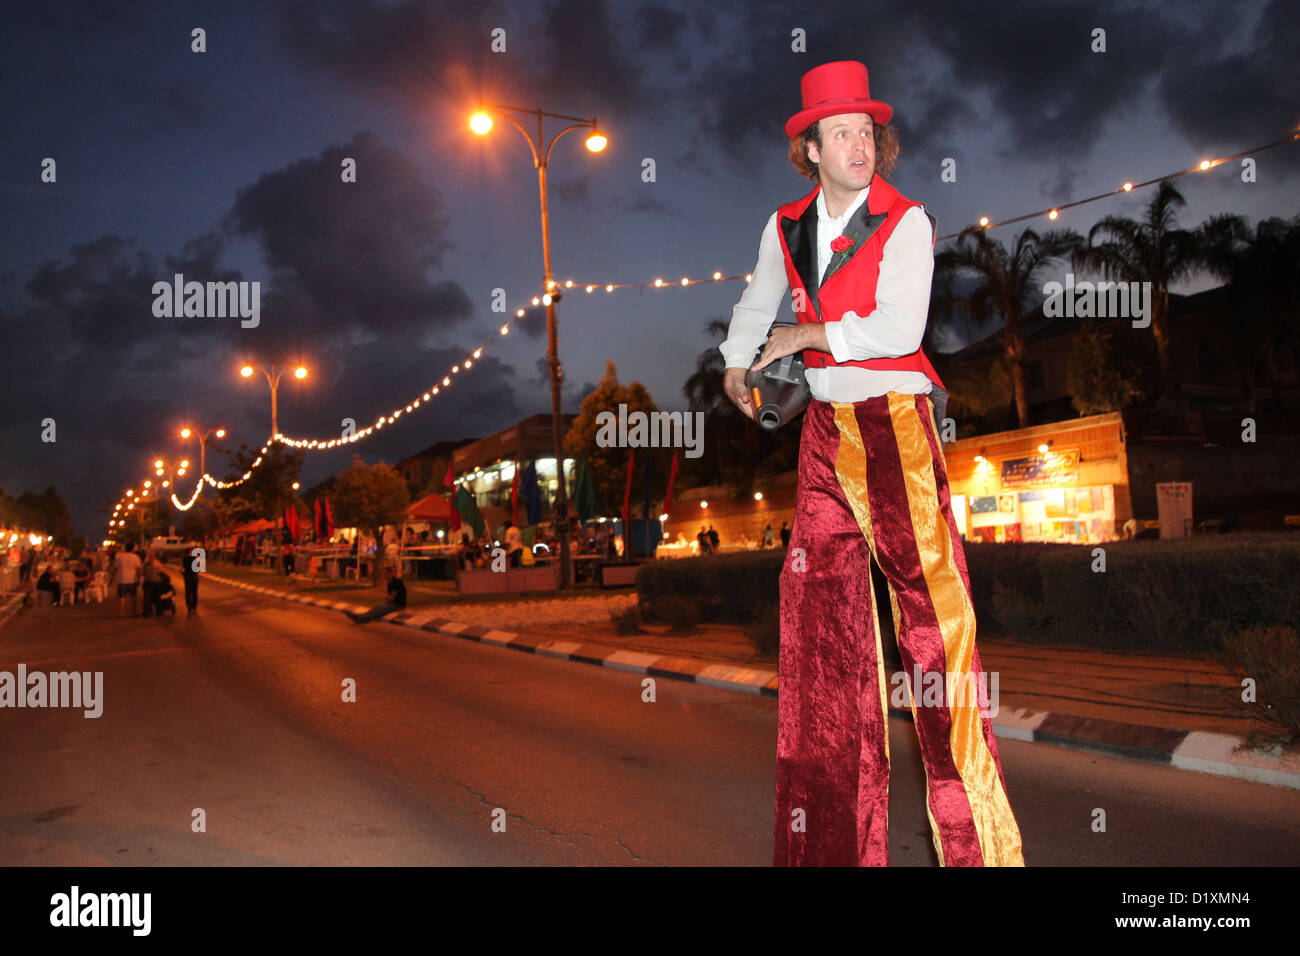 Clown on stilts at a festival. Photographed in Israel at Kfar Yona Stock Photo